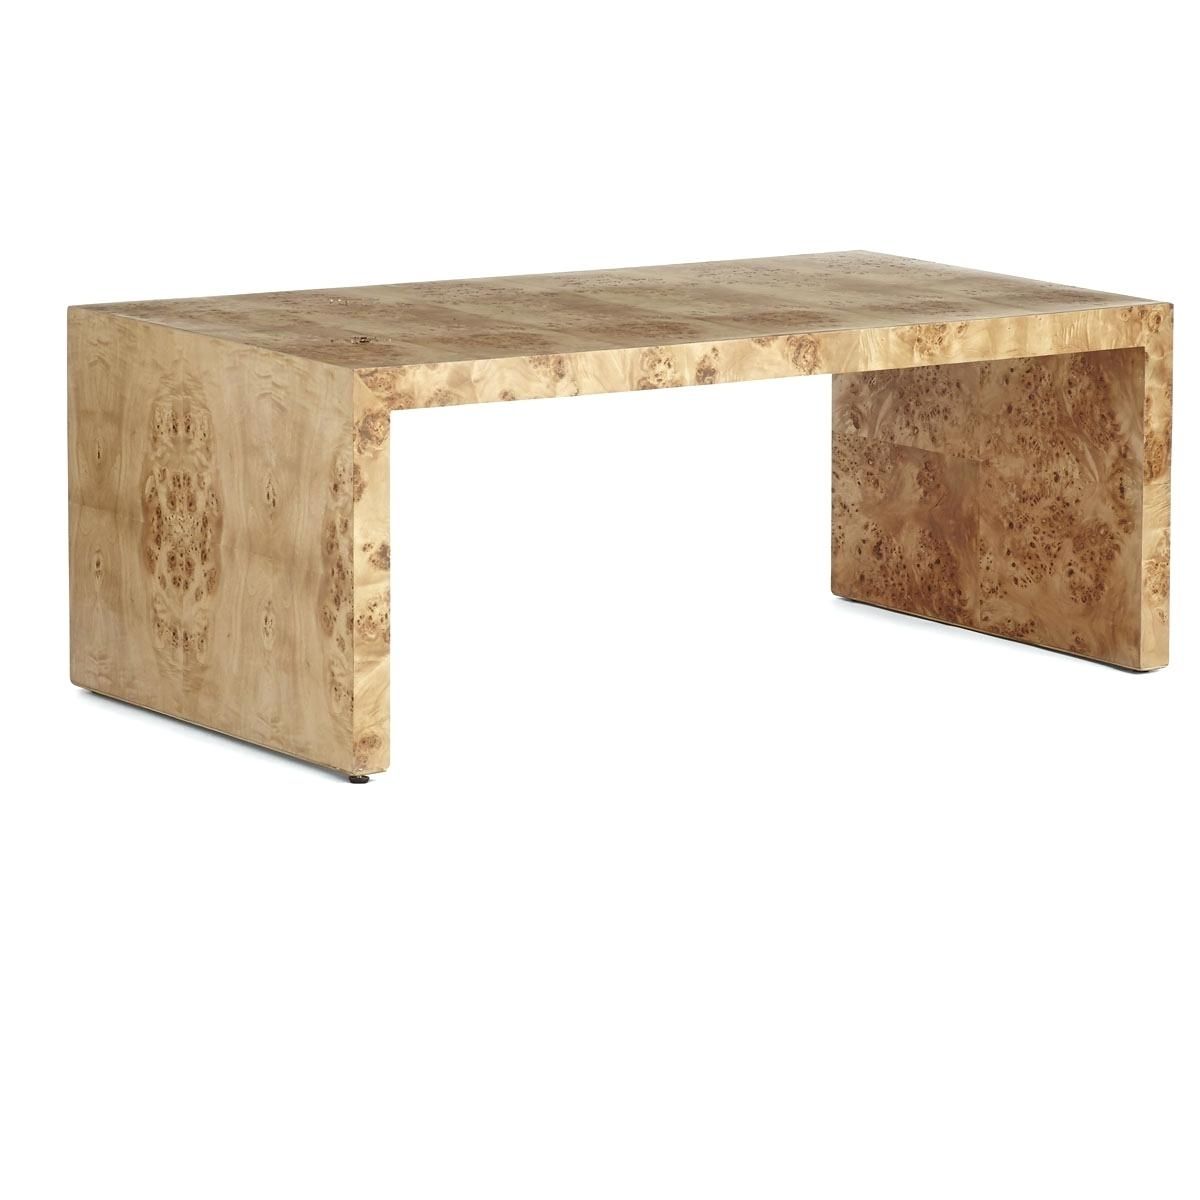 Wisteria Coffee Table – Verged Intended For Disappearing Coffee Tables (View 19 of 30)